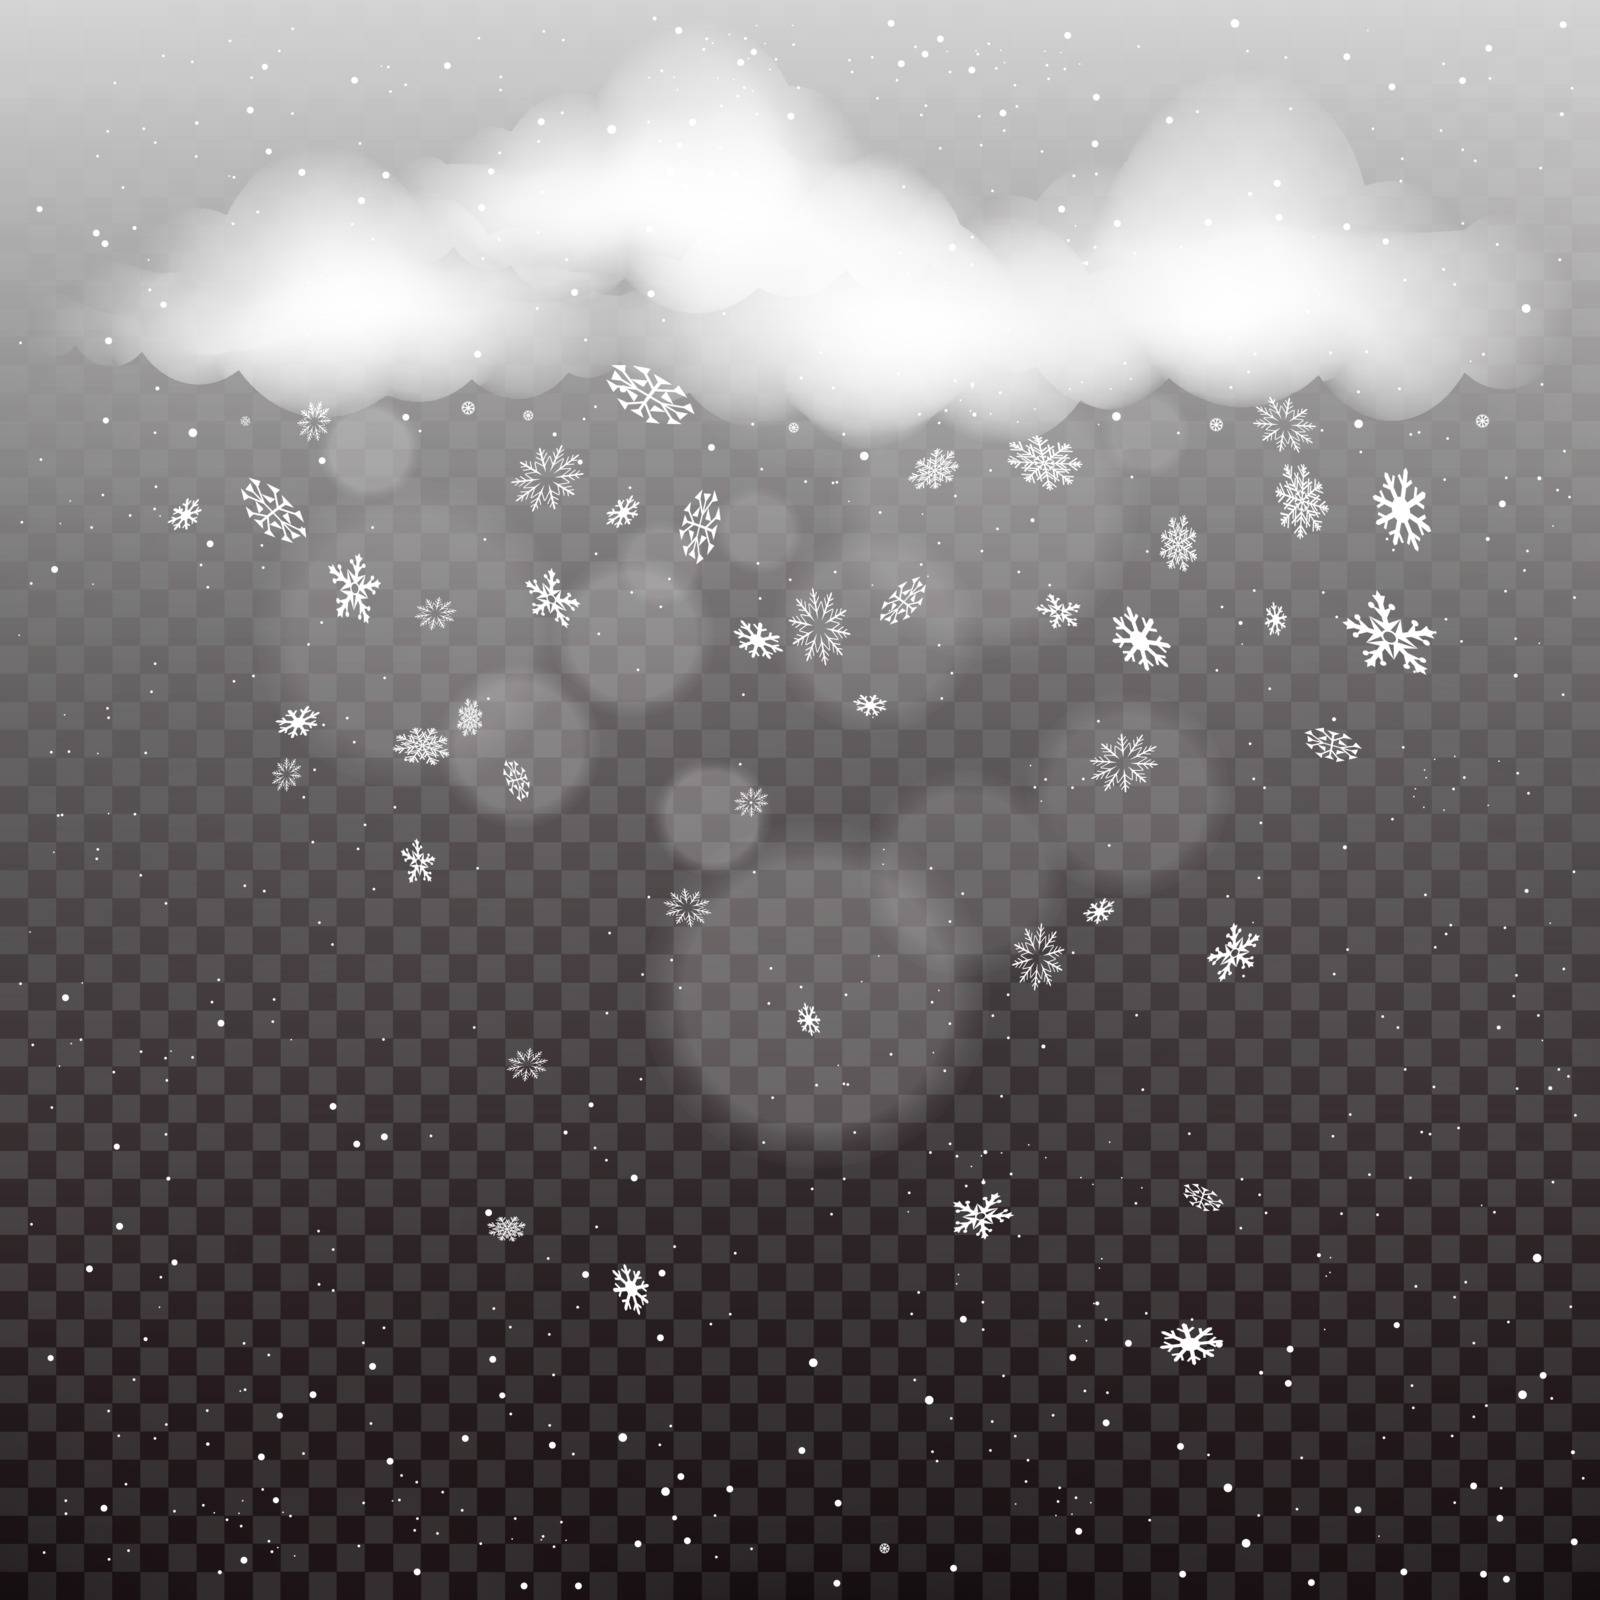 Clouds with snowfall template on dark background. Winter snow falling mockup. Christmas decoration backdrop